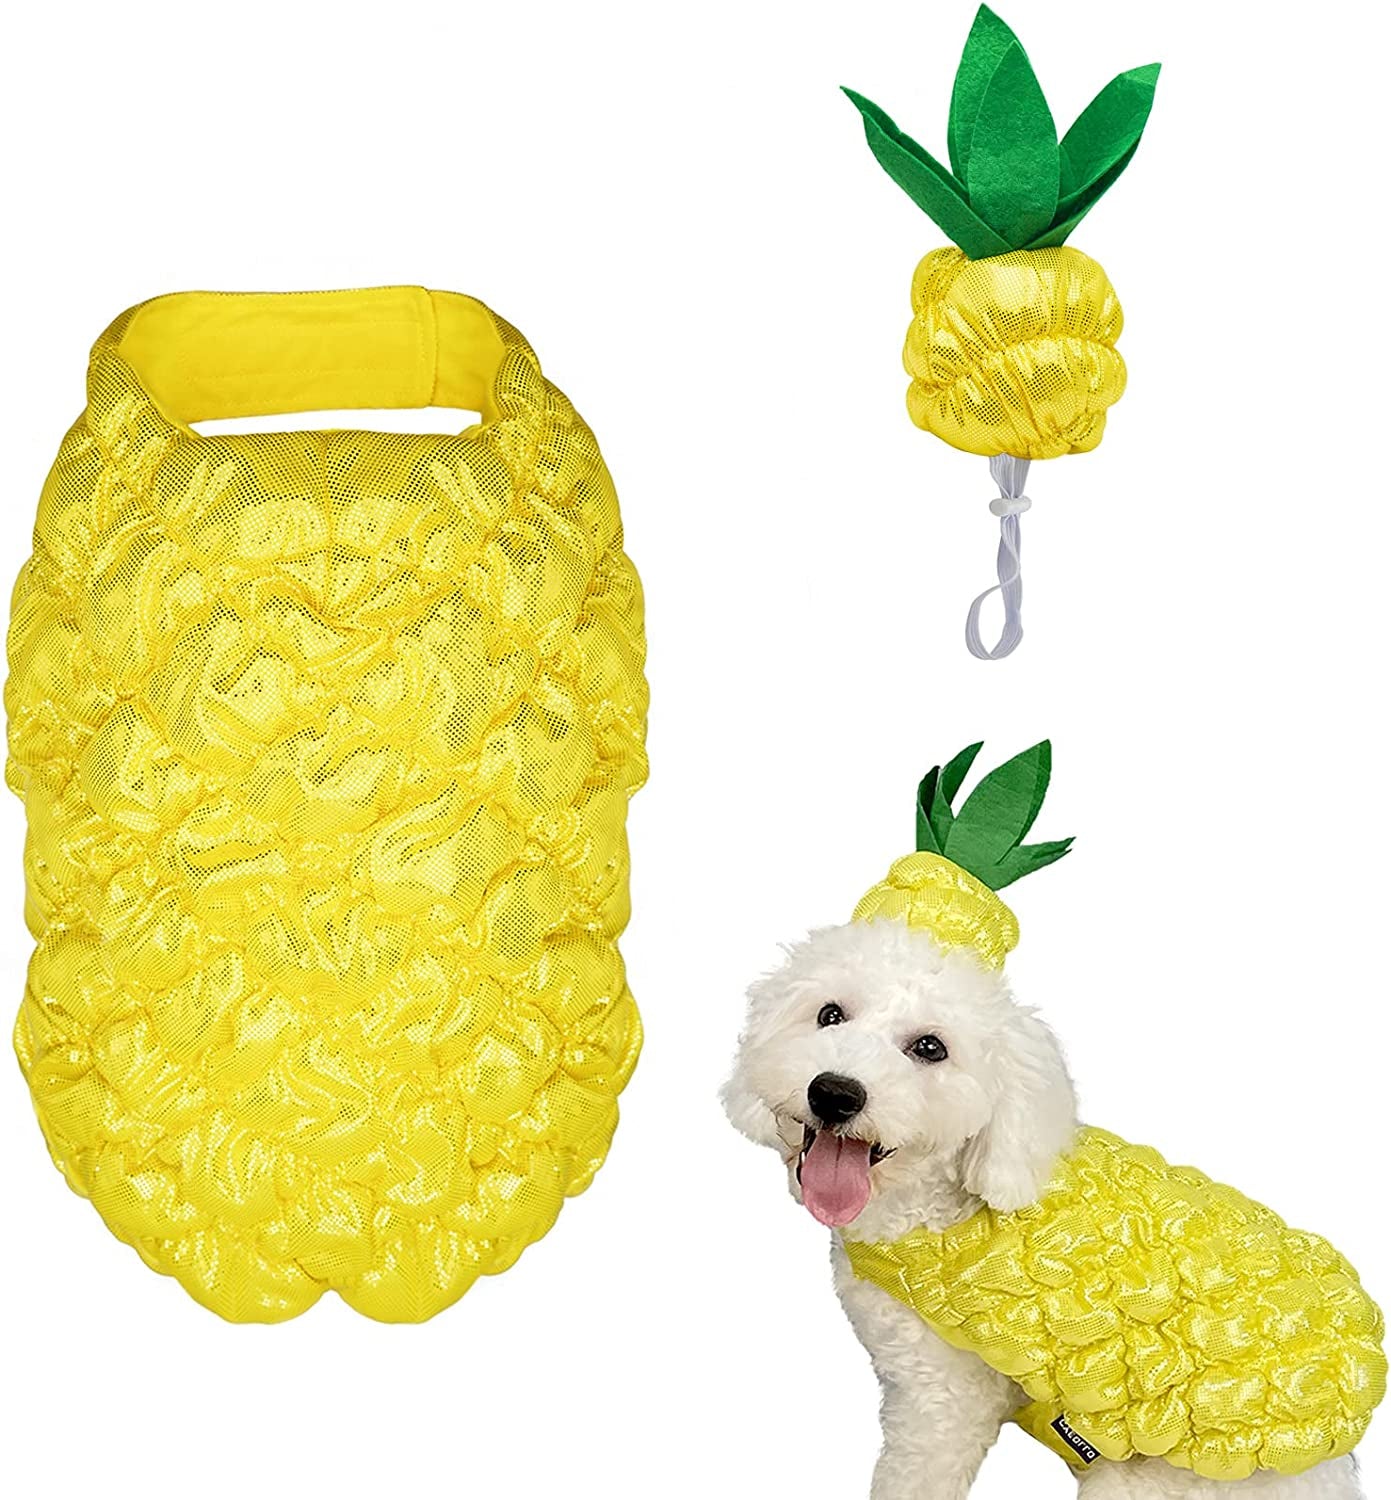 Pineapple Clothing